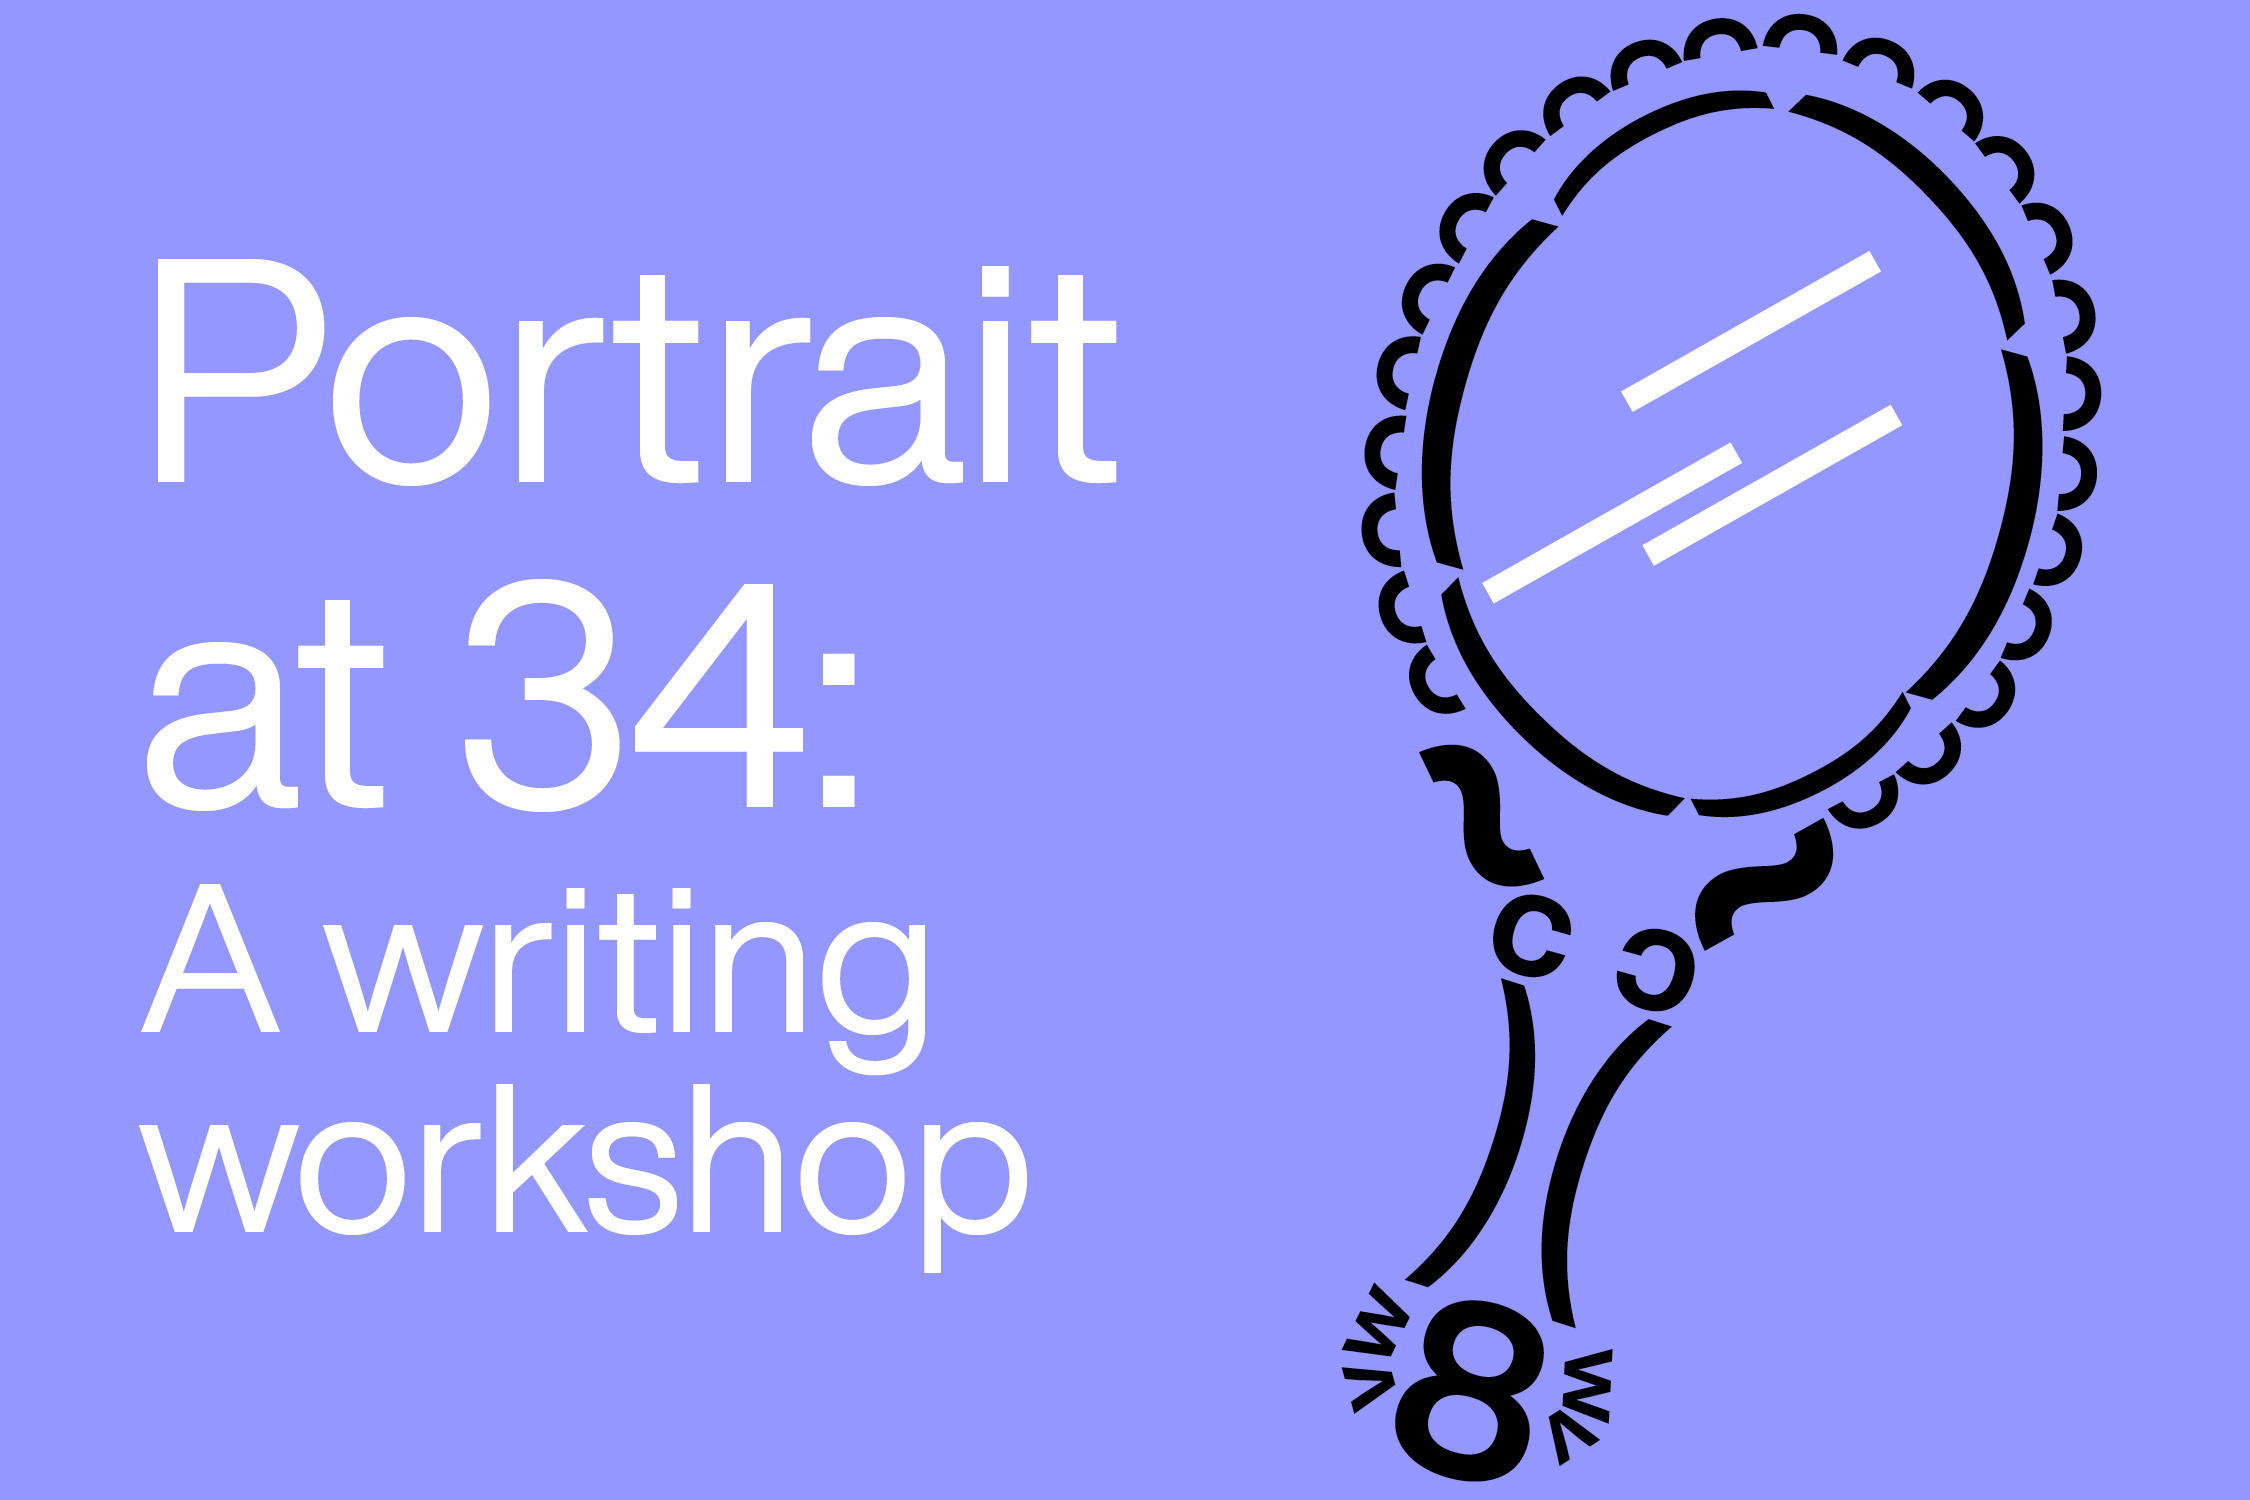 Topos O Miami Library Collab Writing Workshops Instagram V25